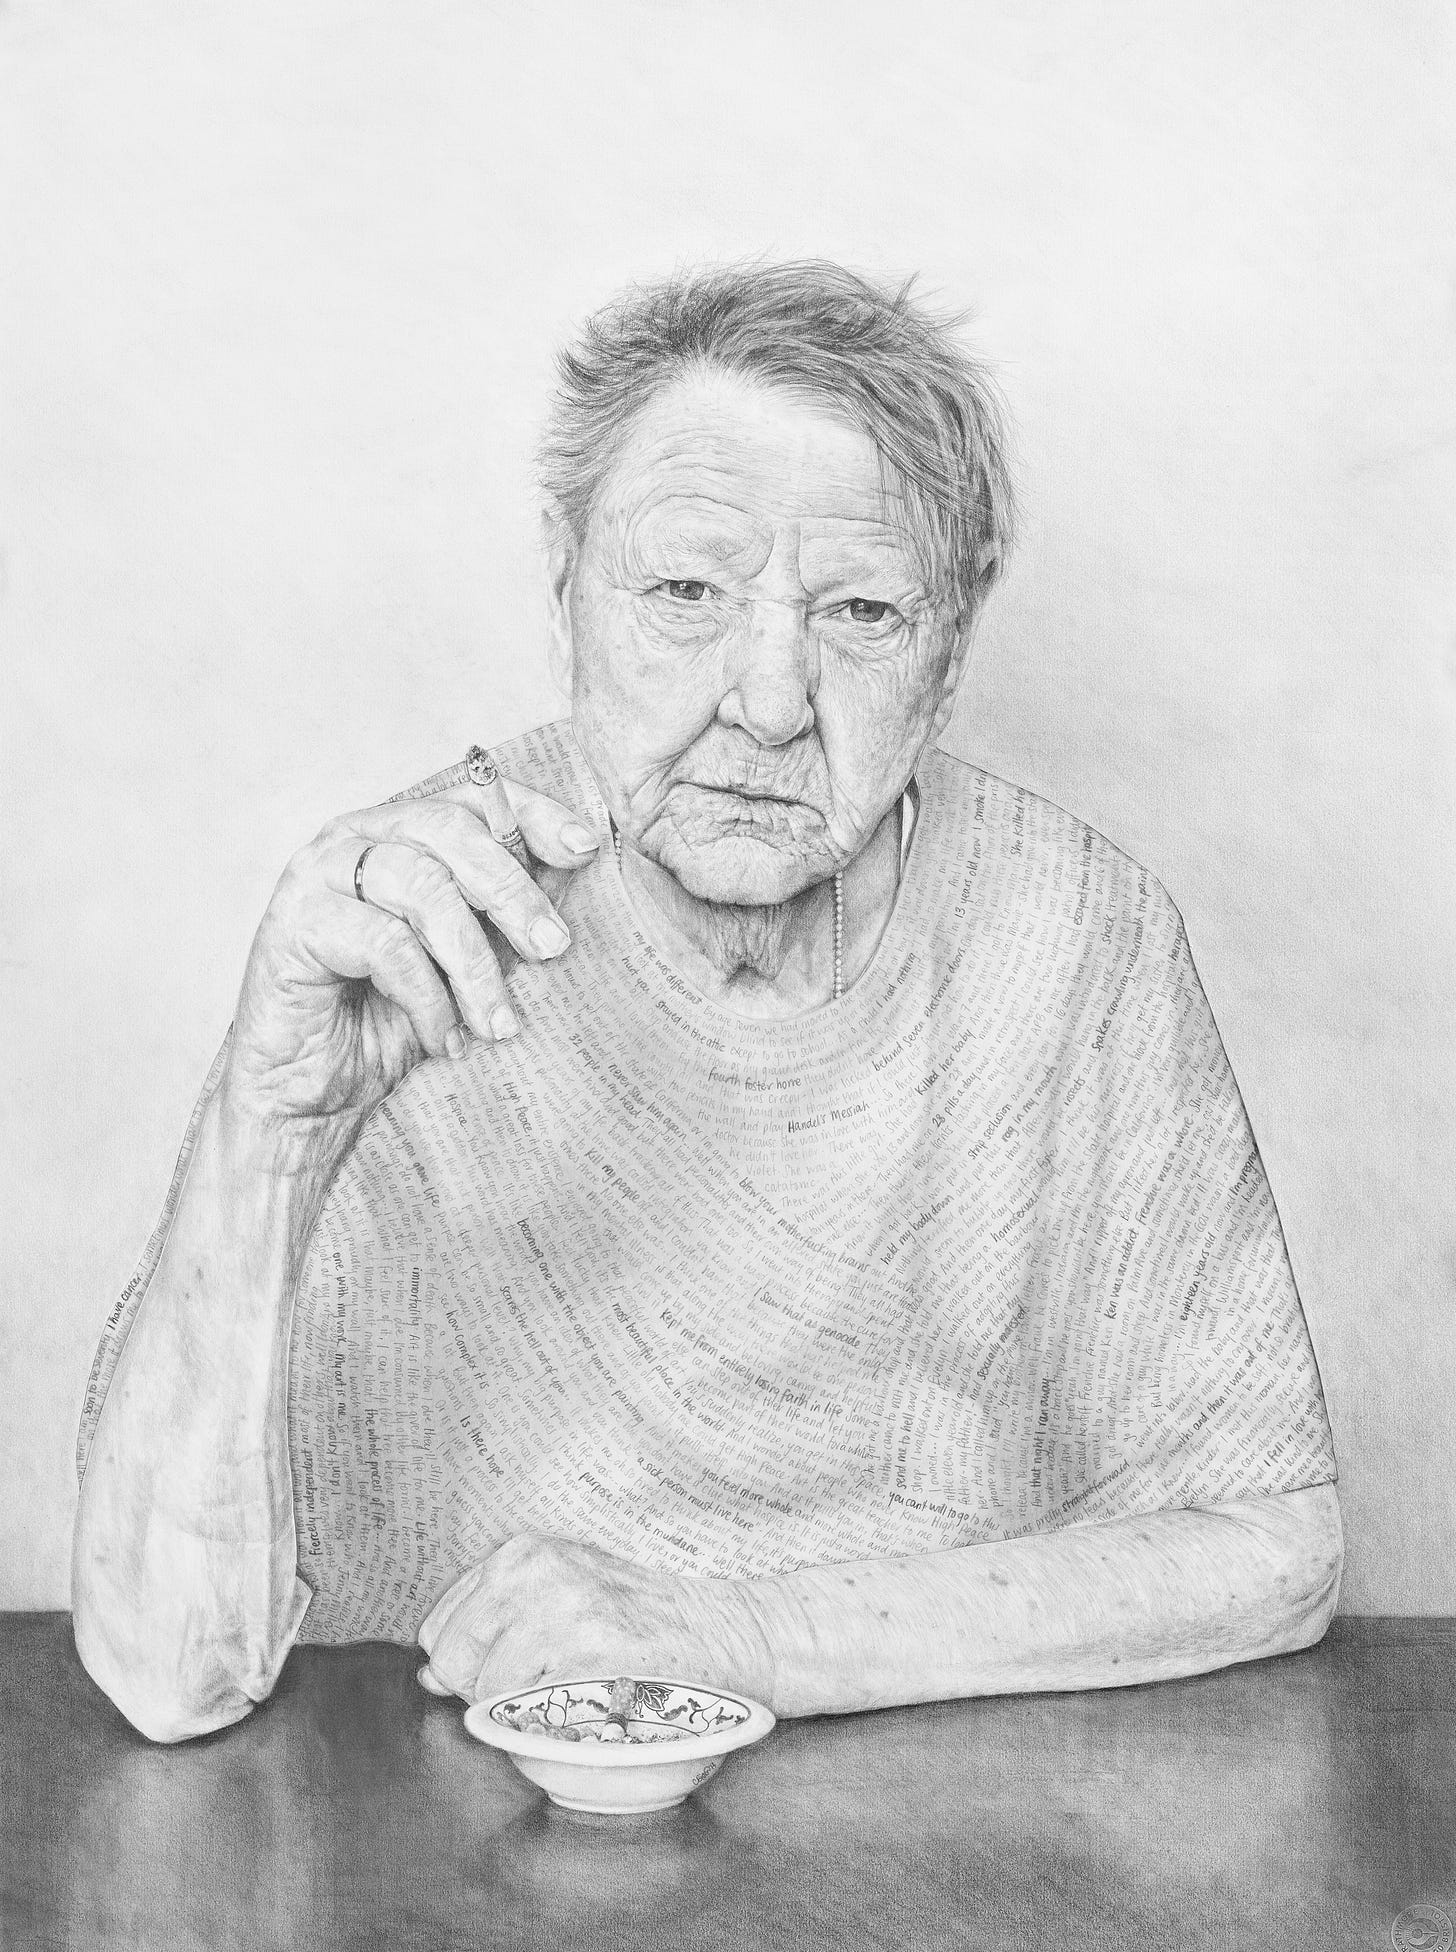 An extremely detailed black-and-white drawing of a short-haired, older woman who seems to stare directly at the viewer. Her right hand holds a partially smoked cigarette. Her left arm rests on a table, behind a small bowl. All over her shirt, in looping text, the artist has printed Jenny's words.